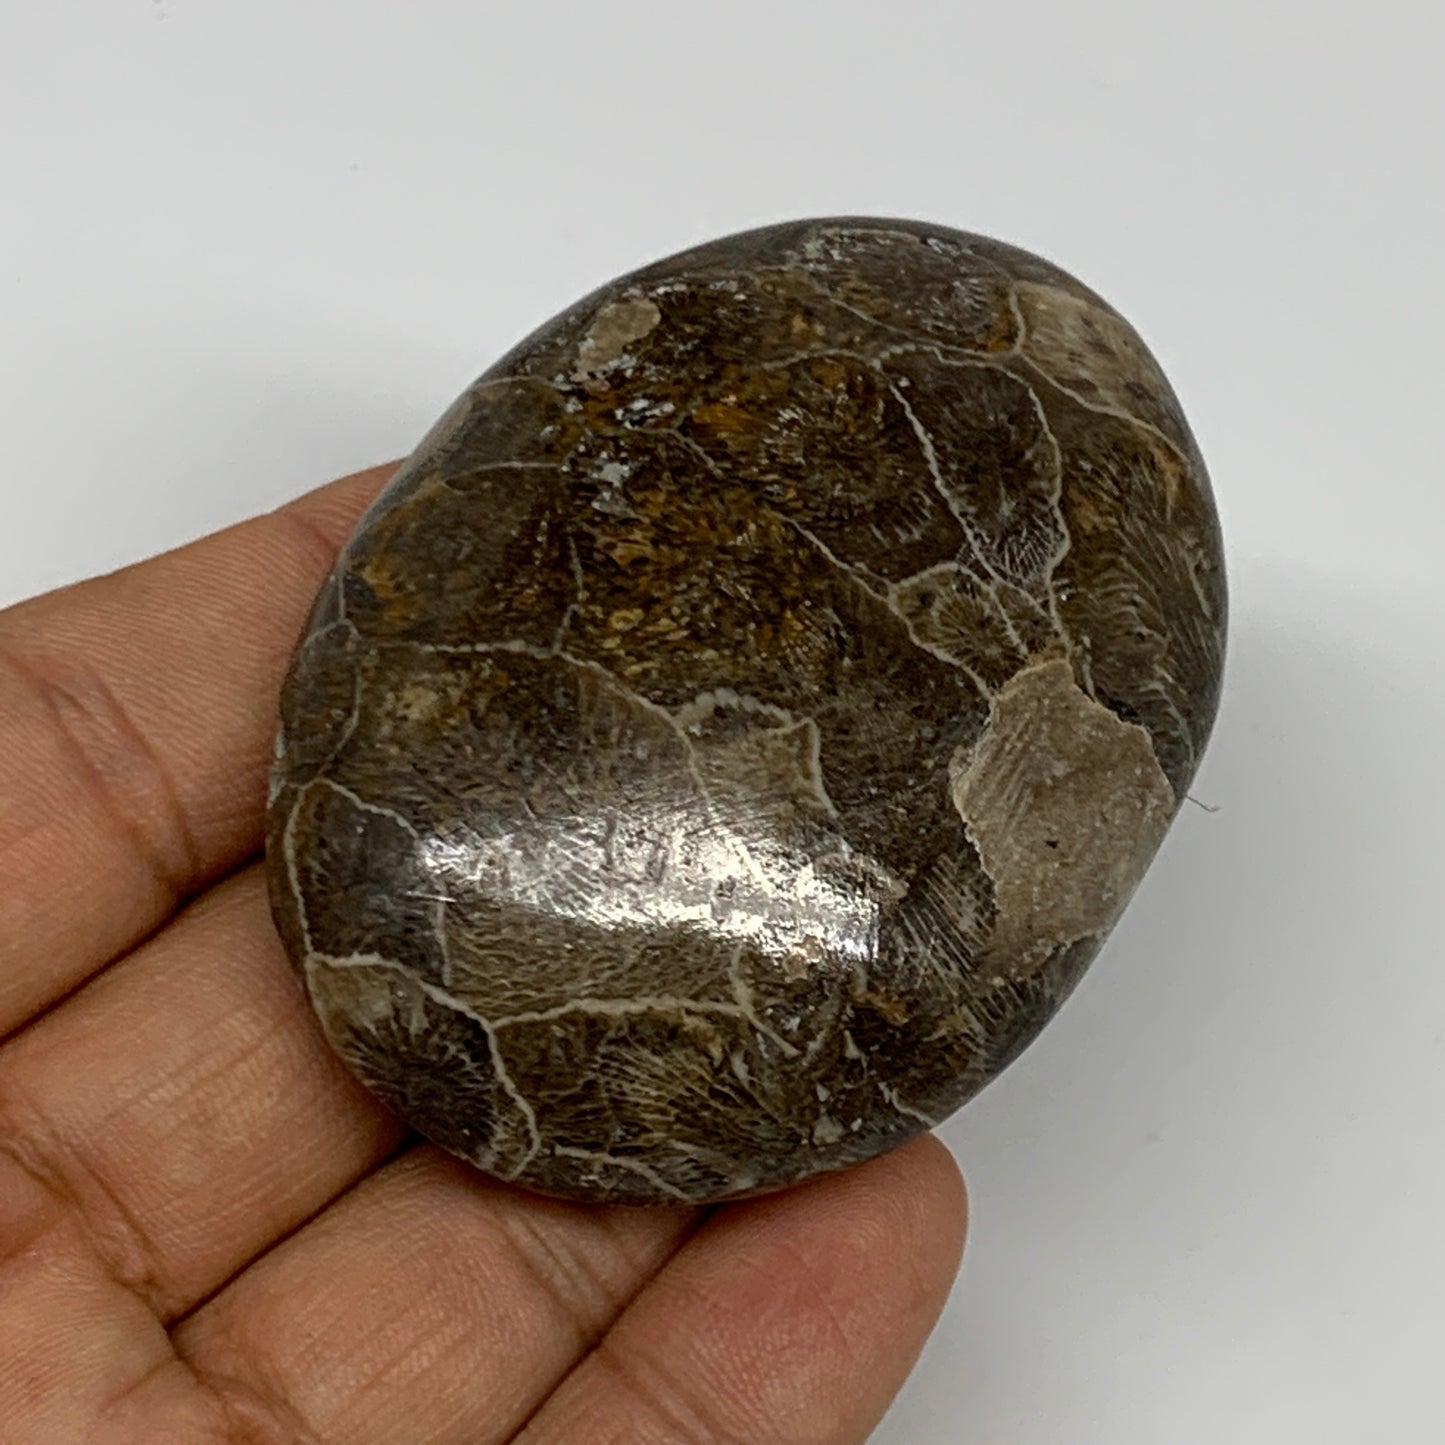 78.8g,2.5"x1.9"x 0.8", Coral Fossils Palm-Stone Polished from Morocco, B20354